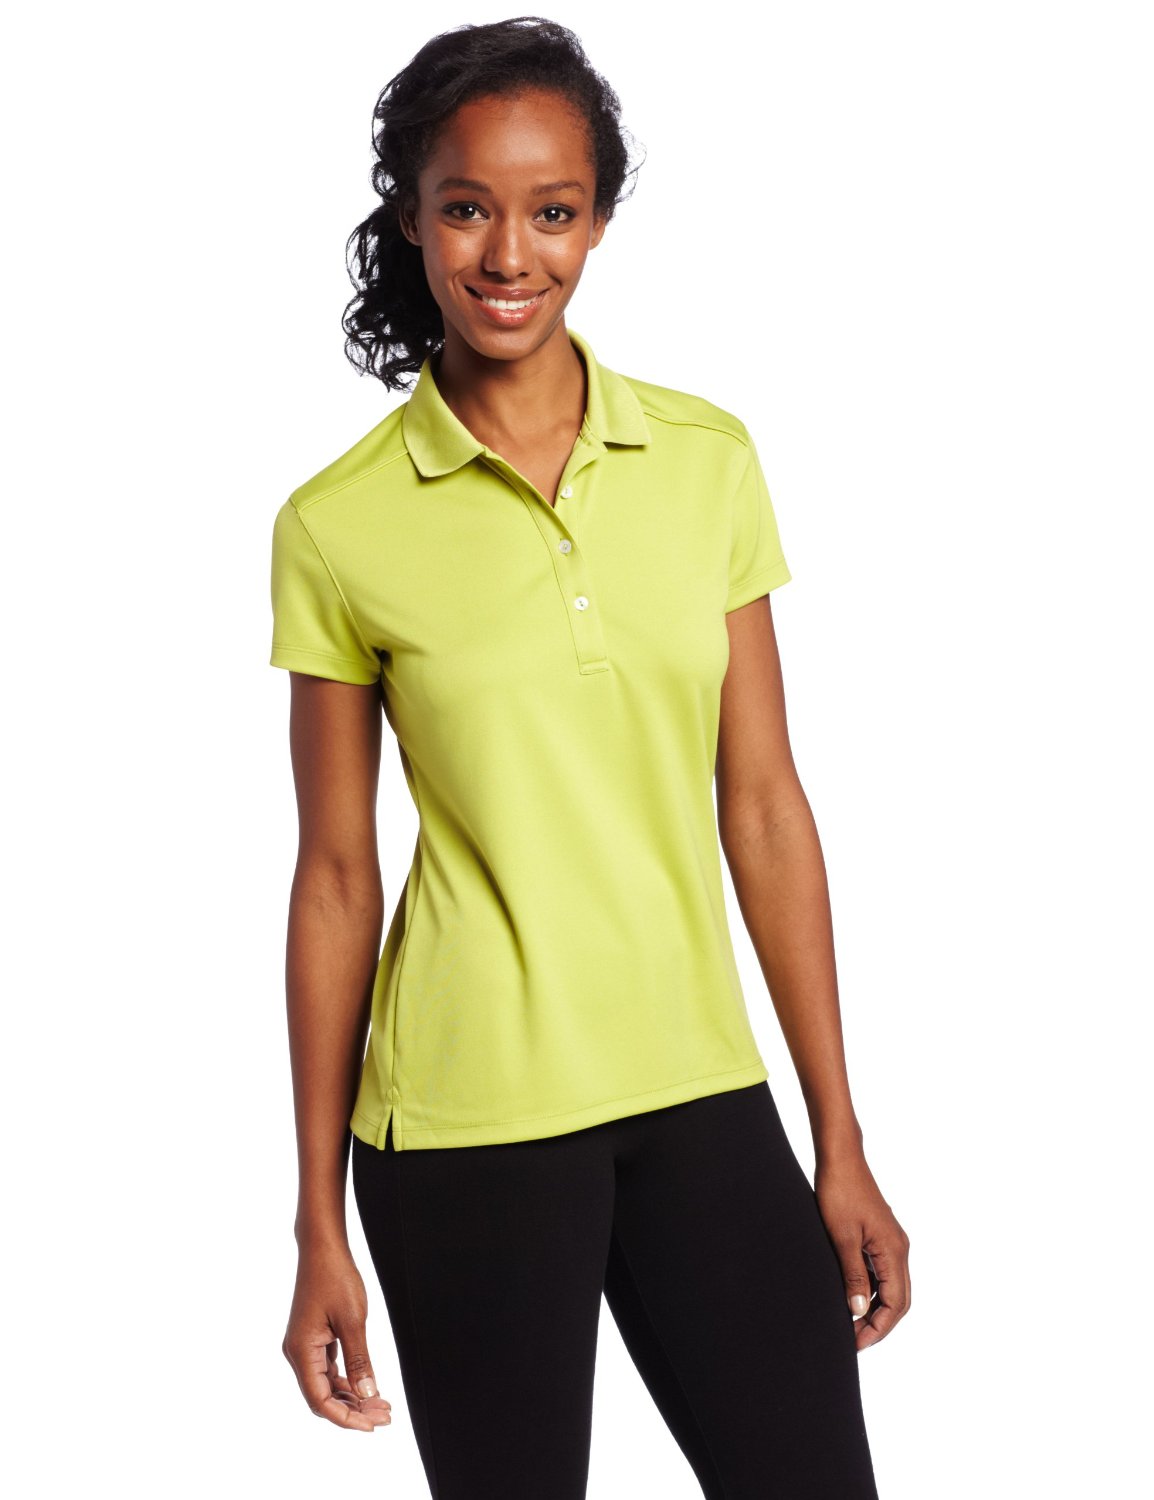 Womens Short Sleeve Solid Double Knit Golf Polo Shirts